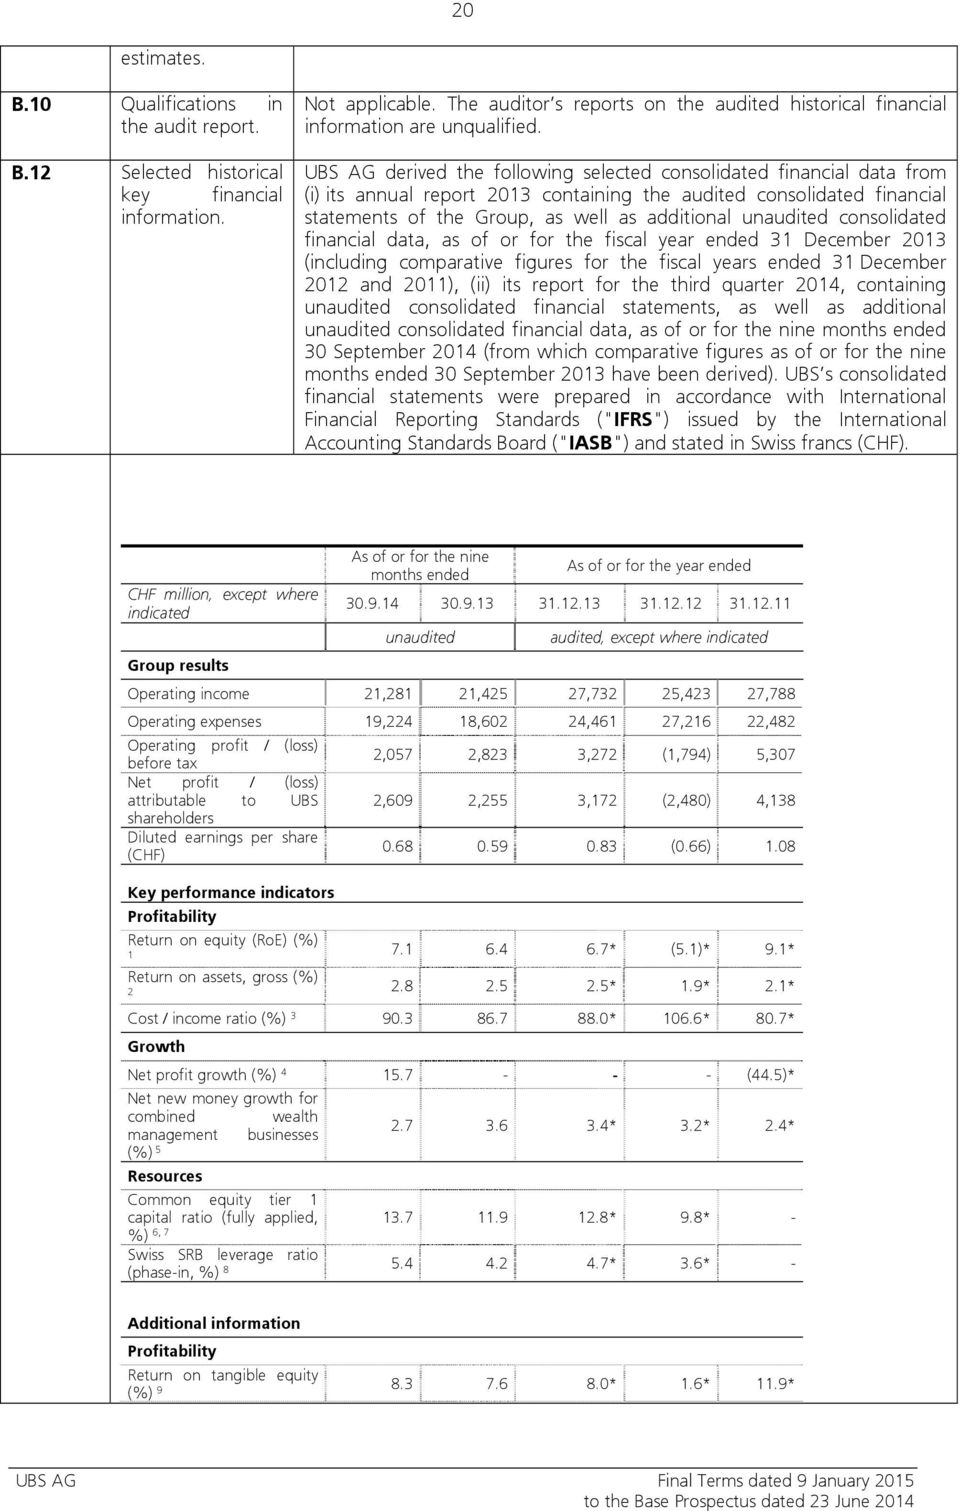 UBS AG derived the following selected consolidated financial data from (i) its annual report 2013 containing the audited consolidated financial statements of the Group, as well as additional